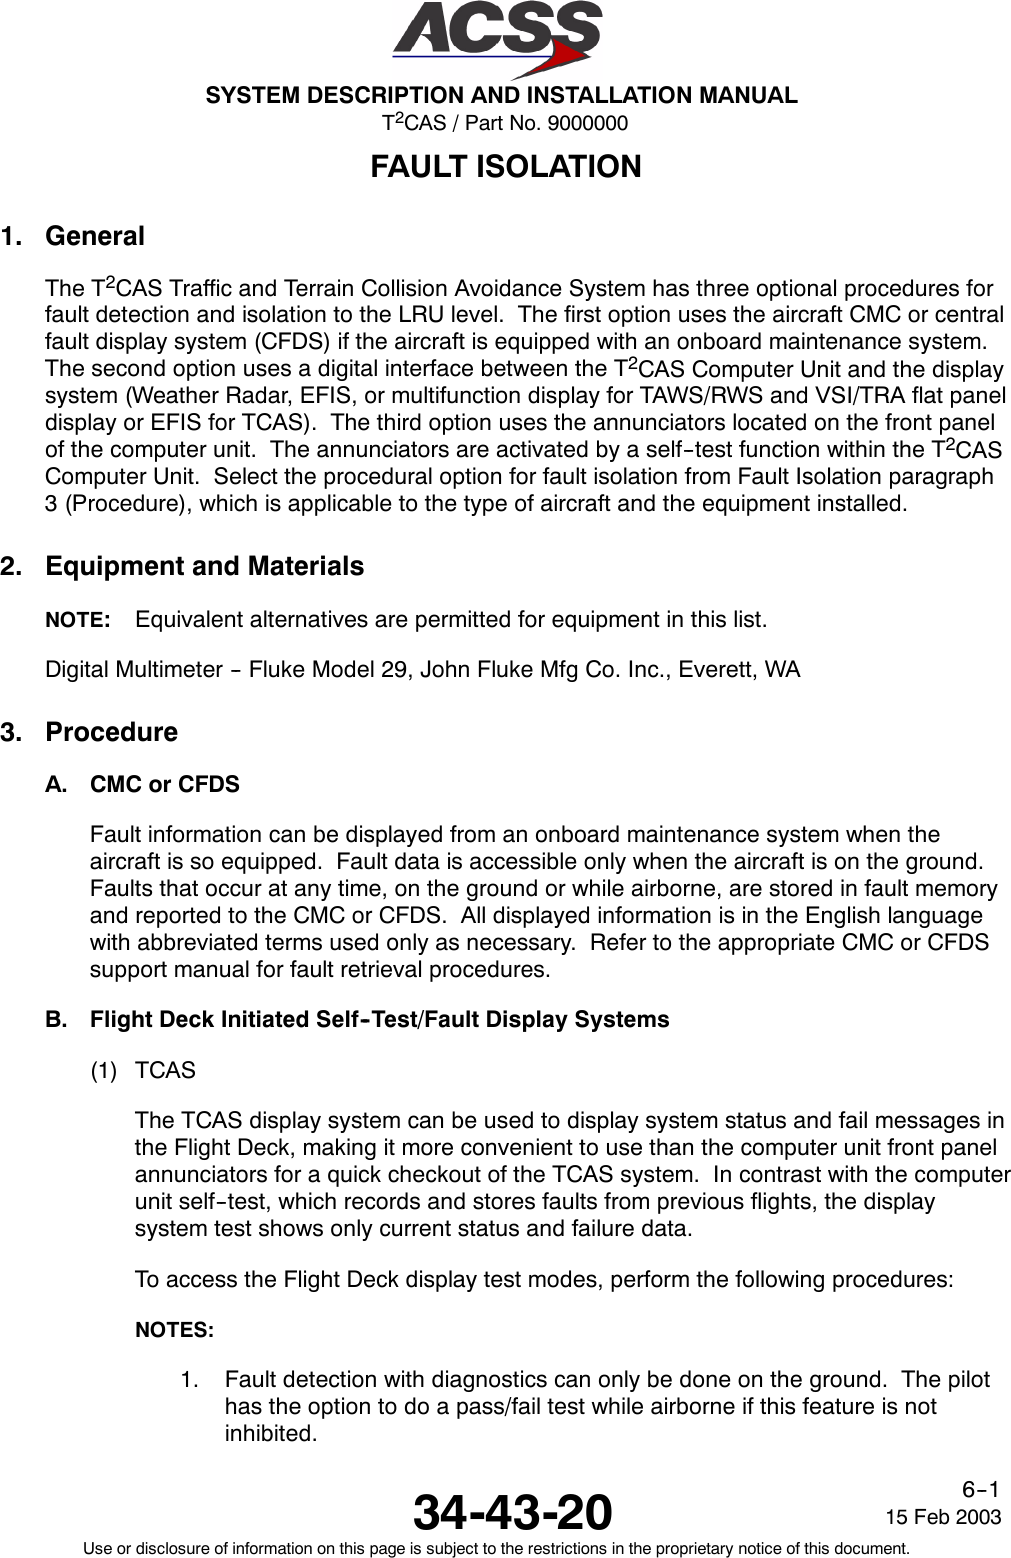 T2CAS / Part No. 9000000SYSTEM DESCRIPTION AND INSTALLATION MANUAL34-43-20 15 Feb 2003Use or disclosure of information on this page is subject to the restrictions in the proprietary notice of this document.6--1FAULT ISOLATION1. GeneralThe T2CAS Traffic and Terrain Collision Avoidance System has three optional procedures forfault detection and isolation to the LRU level. The first option uses the aircraft CMC or centralfault display system (CFDS) if the aircraft is equipped with an onboard maintenance system.The second option uses a digital interface between the T2CAS Computer Unit and the displaysystem (Weather Radar, EFIS, or multifunction display for TAWS/RWS and VSI/TRA flat paneldisplay or EFIS for TCAS). The third option uses the annunciators located on the front panelof the computer unit. The annunciators are activated by a self--test function within the T2CASComputer Unit. Select the procedural option for fault isolation from Fault Isolation paragraph3 (Procedure), which is applicable to the type of aircraft and the equipment installed.2. Equipment and MaterialsNOTE:Equivalent alternatives are permitted for equipment in this list.Digital Multimeter -- Fluke Model 29, John Fluke Mfg Co. Inc., Everett, WA3. ProcedureA. CMC or CFDSFault information can be displayed from an onboard maintenance system when theaircraft is so equipped. Fault data is accessible only when the aircraft is on the ground.Faults that occur at any time, on the ground or while airborne, are stored in fault memoryand reported to the CMC or CFDS. All displayed information is in the English languagewith abbreviated terms used only as necessary. Refer to the appropriate CMC or CFDSsupport manual for fault retrieval procedures.B. Flight Deck Initiated Self--Test/Fault Display Systems(1) TCASThe TCAS display system can be used to display system status and fail messages inthe Flight Deck, making it more convenient to use than the computer unit front panelannunciators for a quick checkout of the TCAS system. In contrast with the computerunit self--test, which records and stores faults from previous flights, the displaysystem test shows only current status and failure data.To access the Flight Deck display test modes, perform the following procedures:NOTES:1. Fault detection with diagnostics can only be done on the ground. The pilothas the option to do a pass/fail test while airborne if this feature is notinhibited.